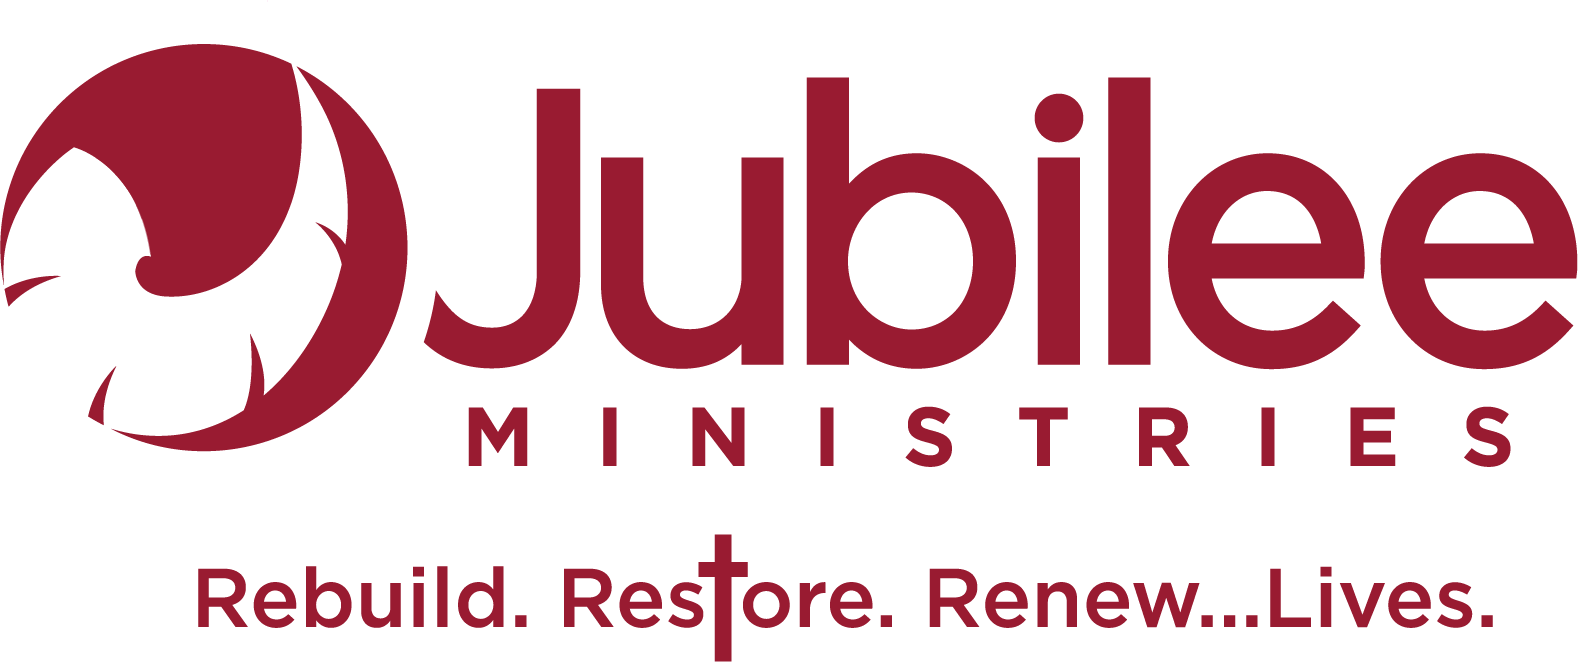 ANNVILLE RE-BUILD-IT - Jubilee Ministries and Stores